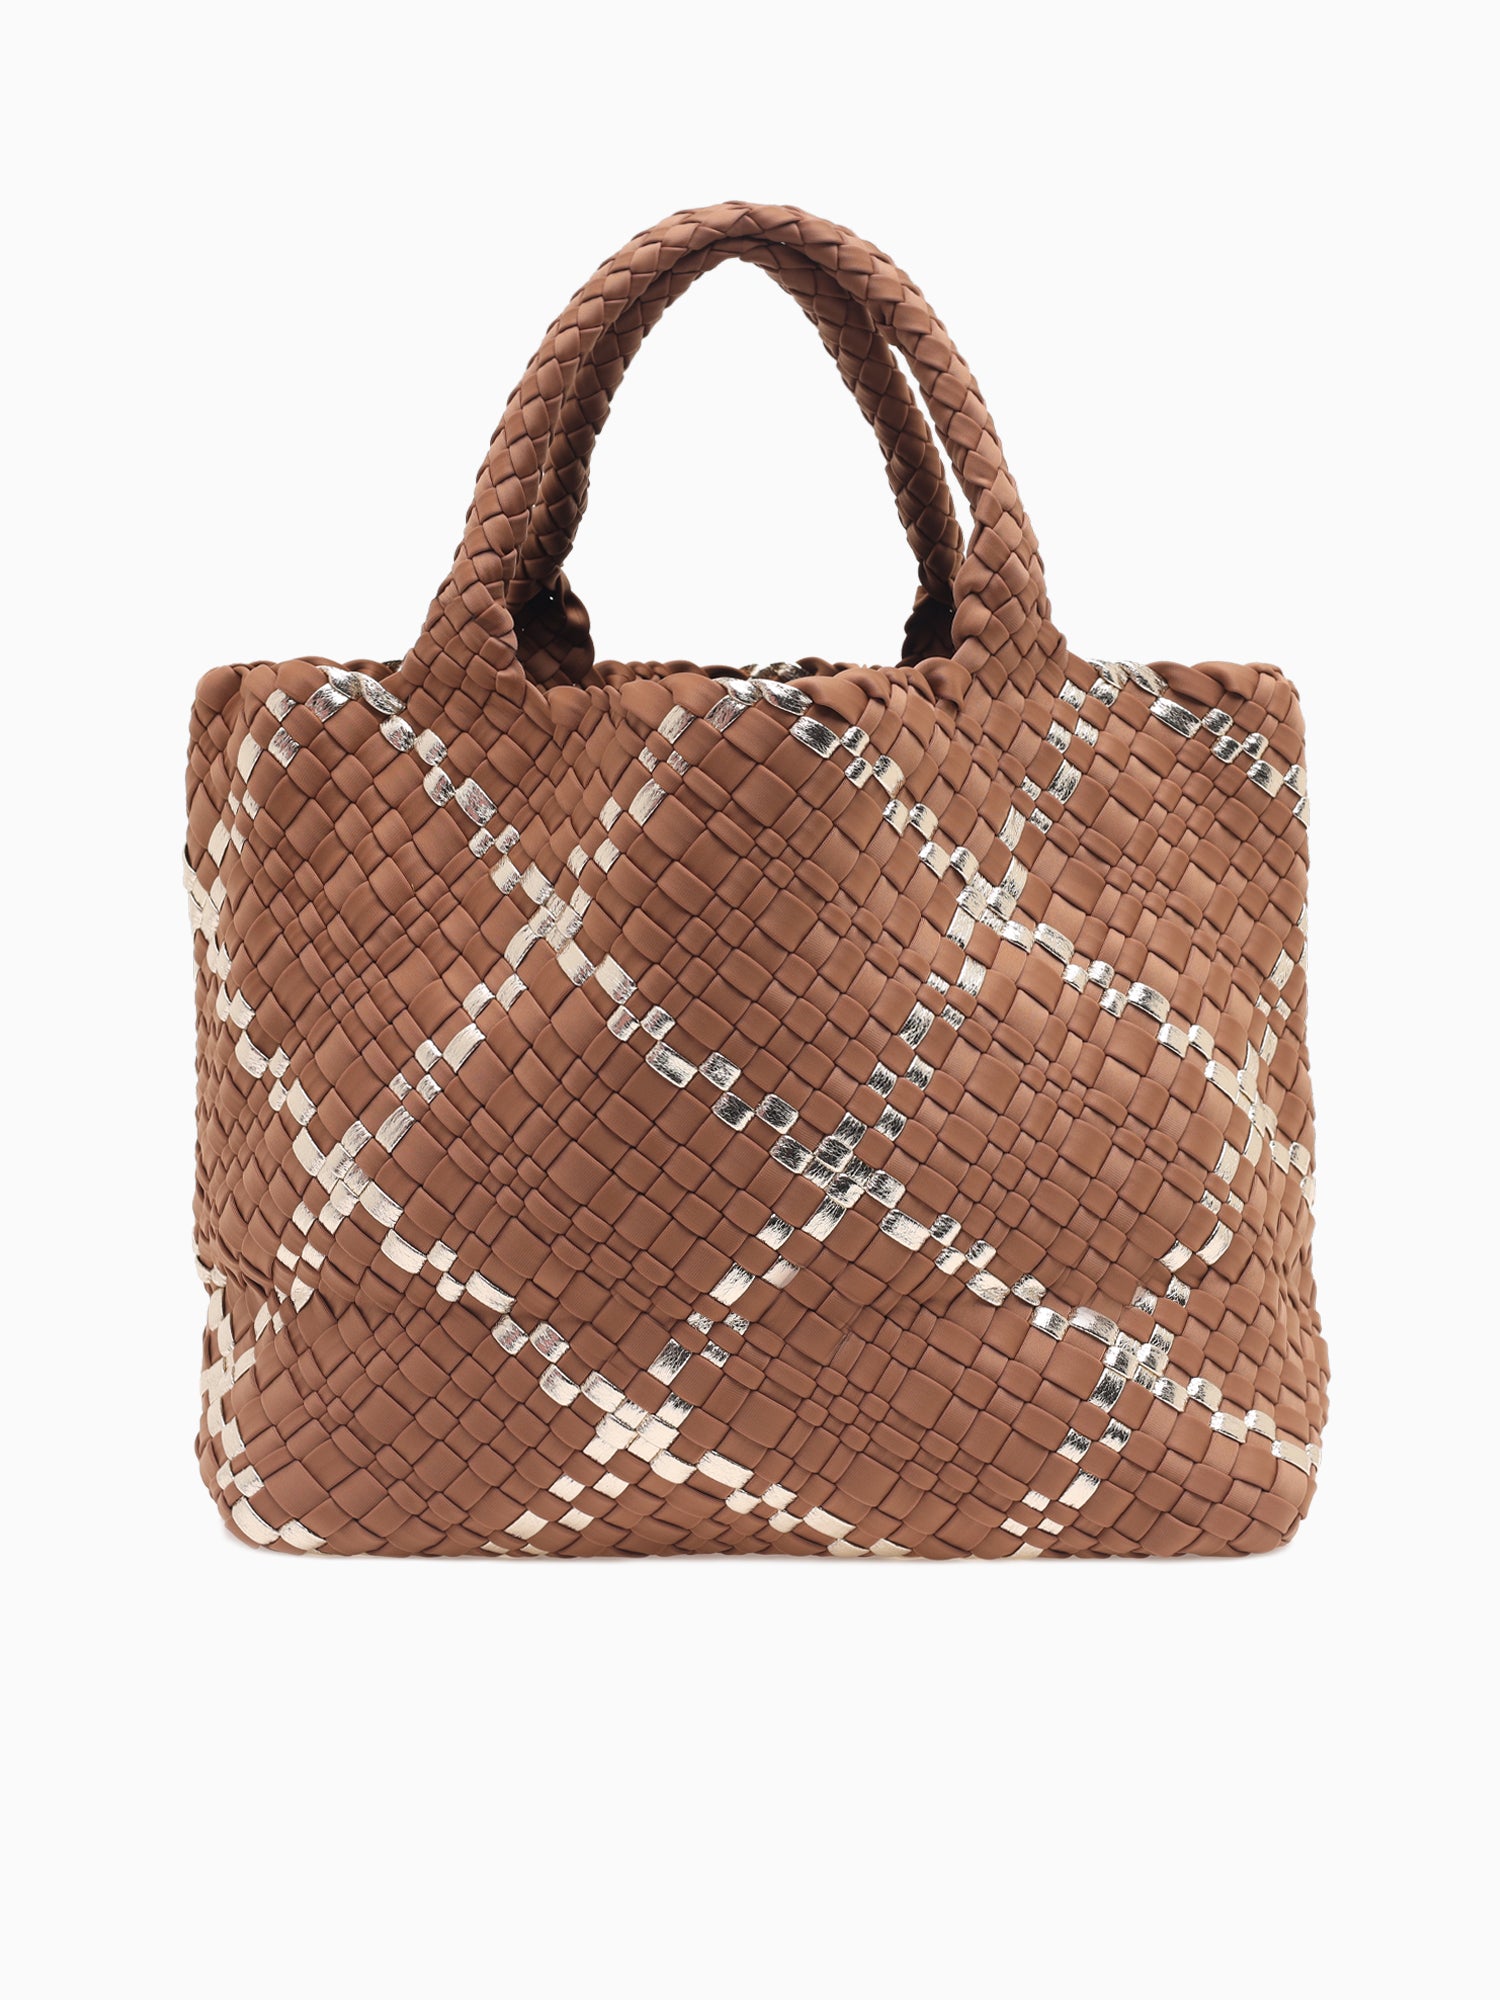 Woven Tote Brown Brown